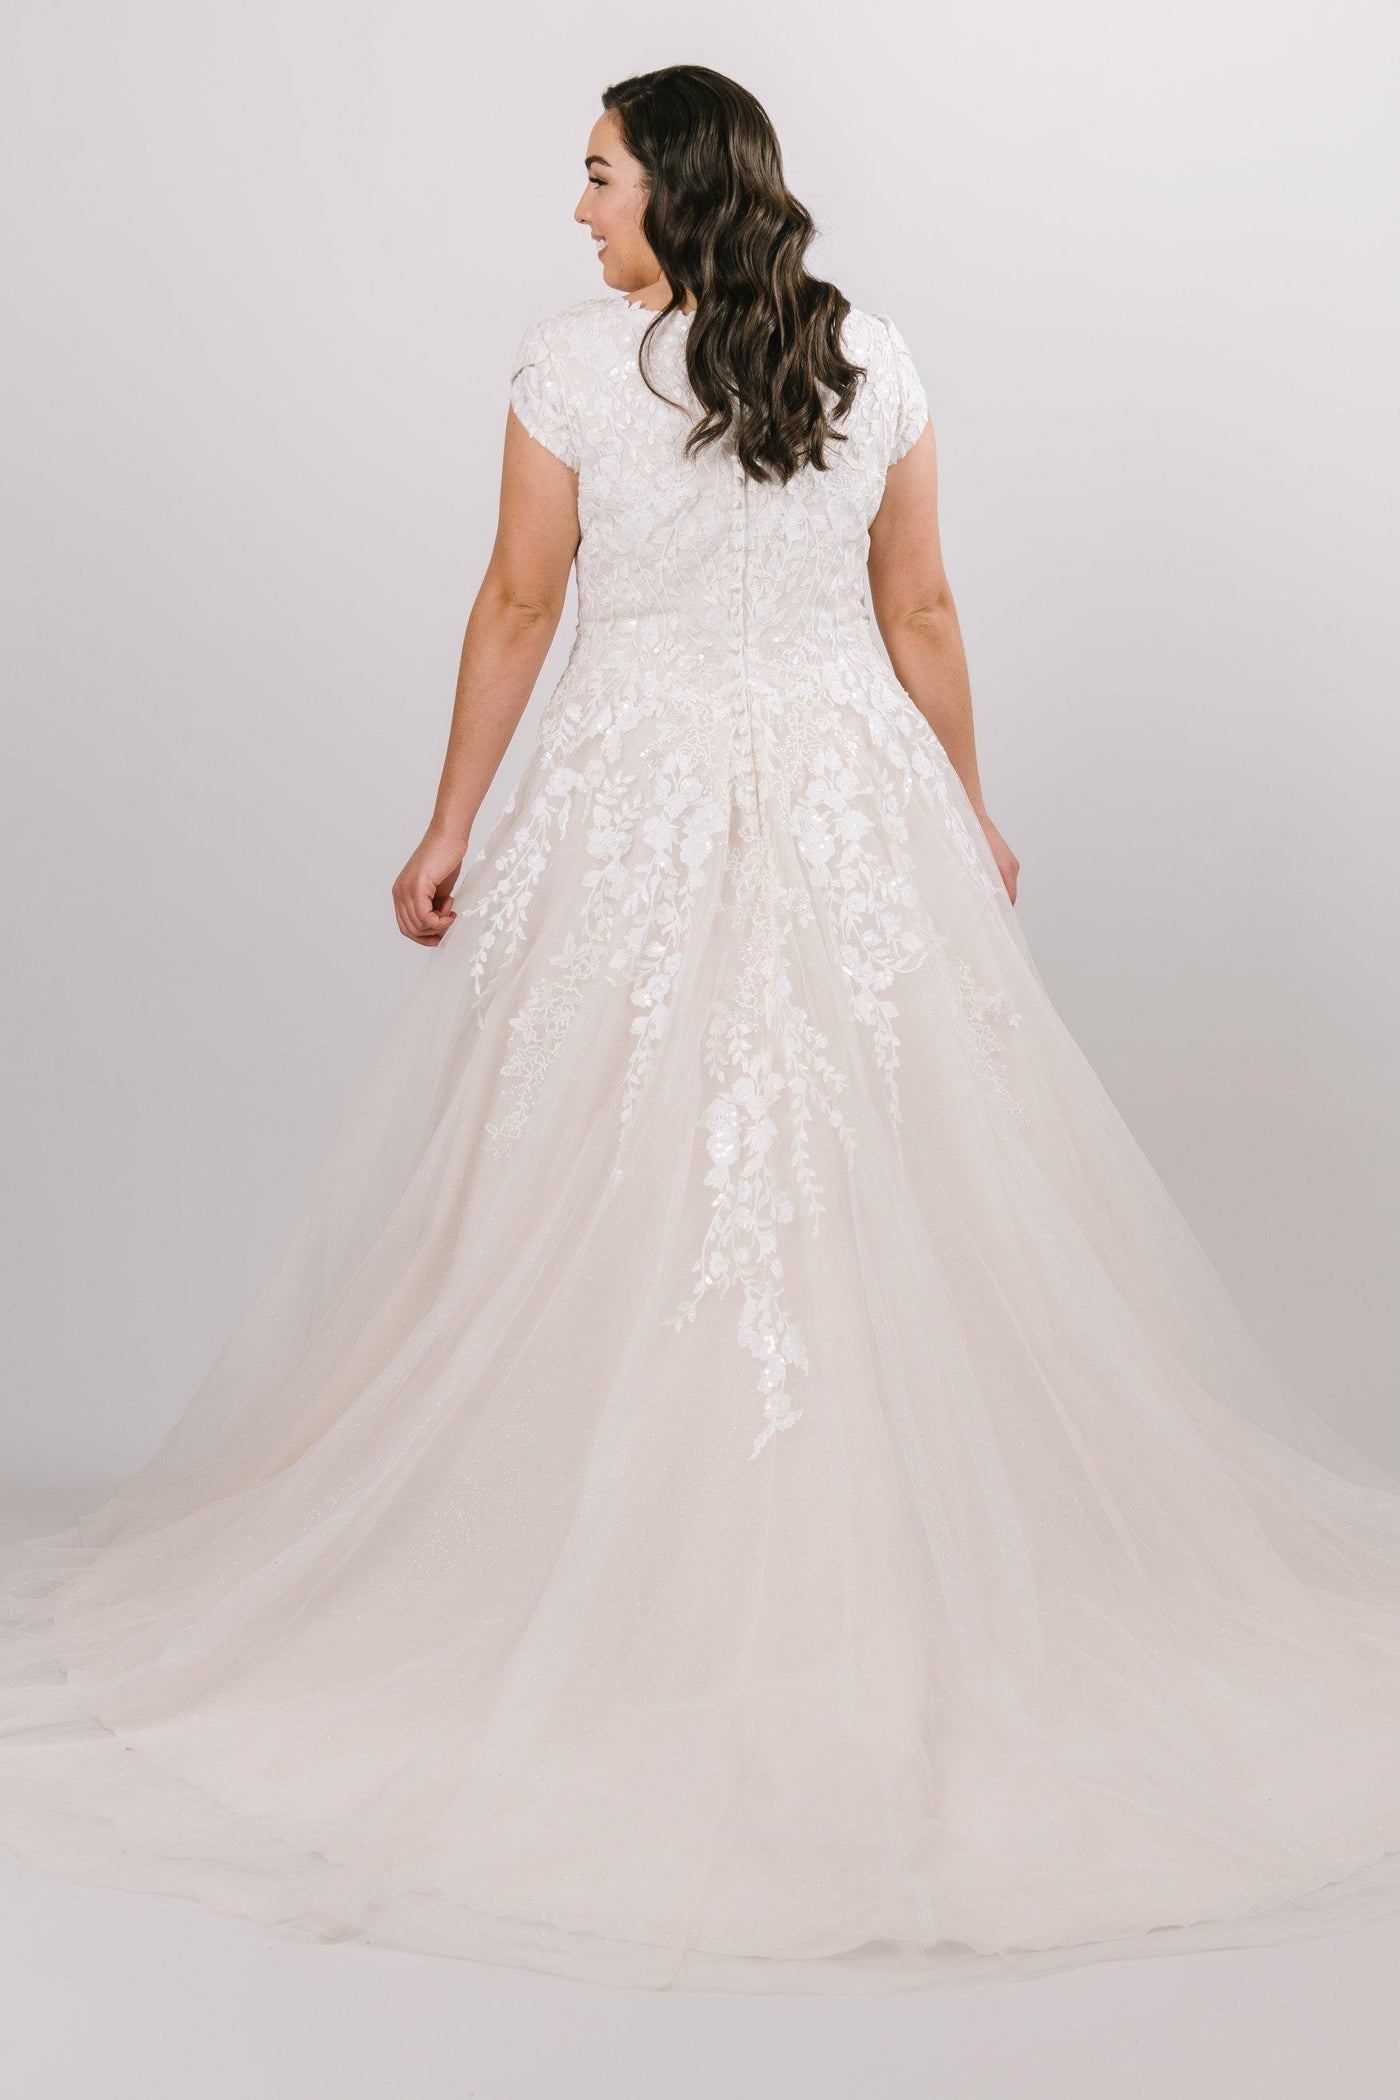 Modest ballgown with lace and sparkles from LatterDayBride, a modest wedding dress shop in Salt Lake City, Utah.